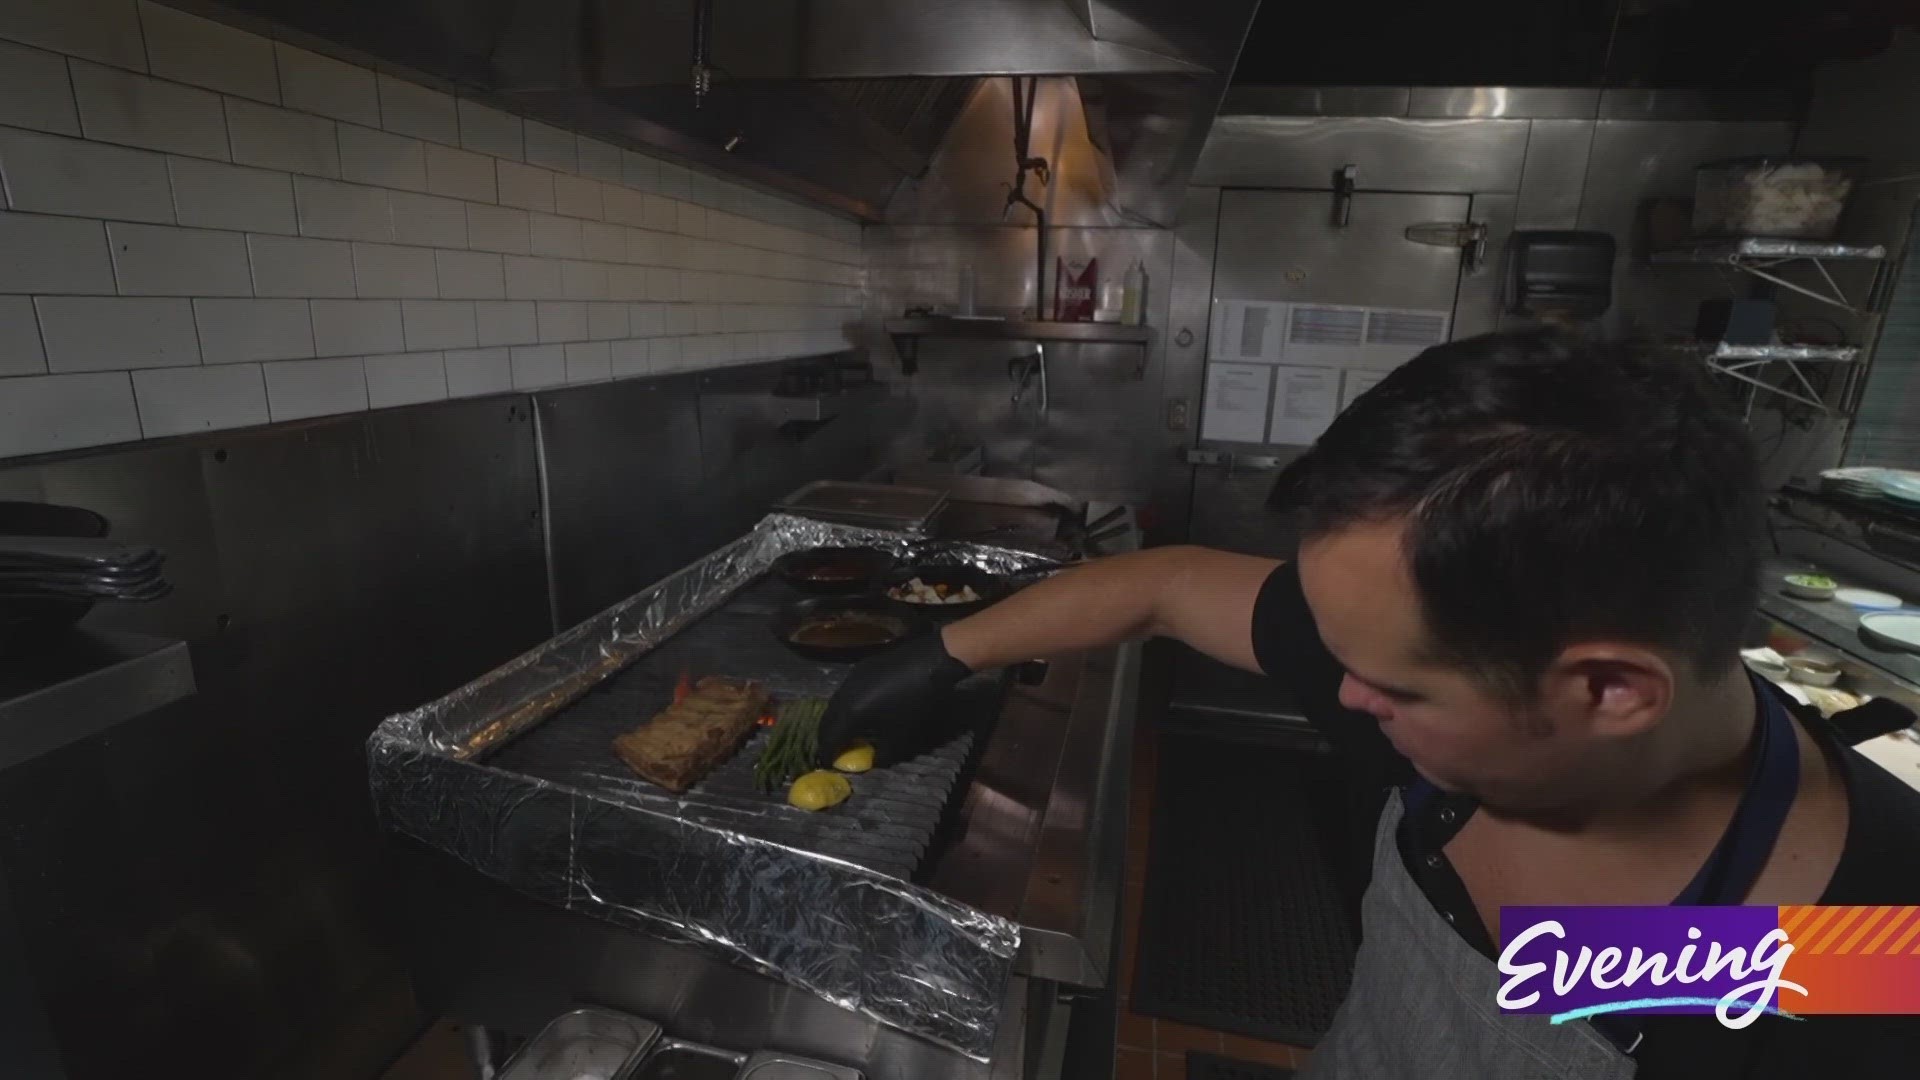 The menu features playful takes on traditional dishes and flavors of Southeast Asia. #k5evening